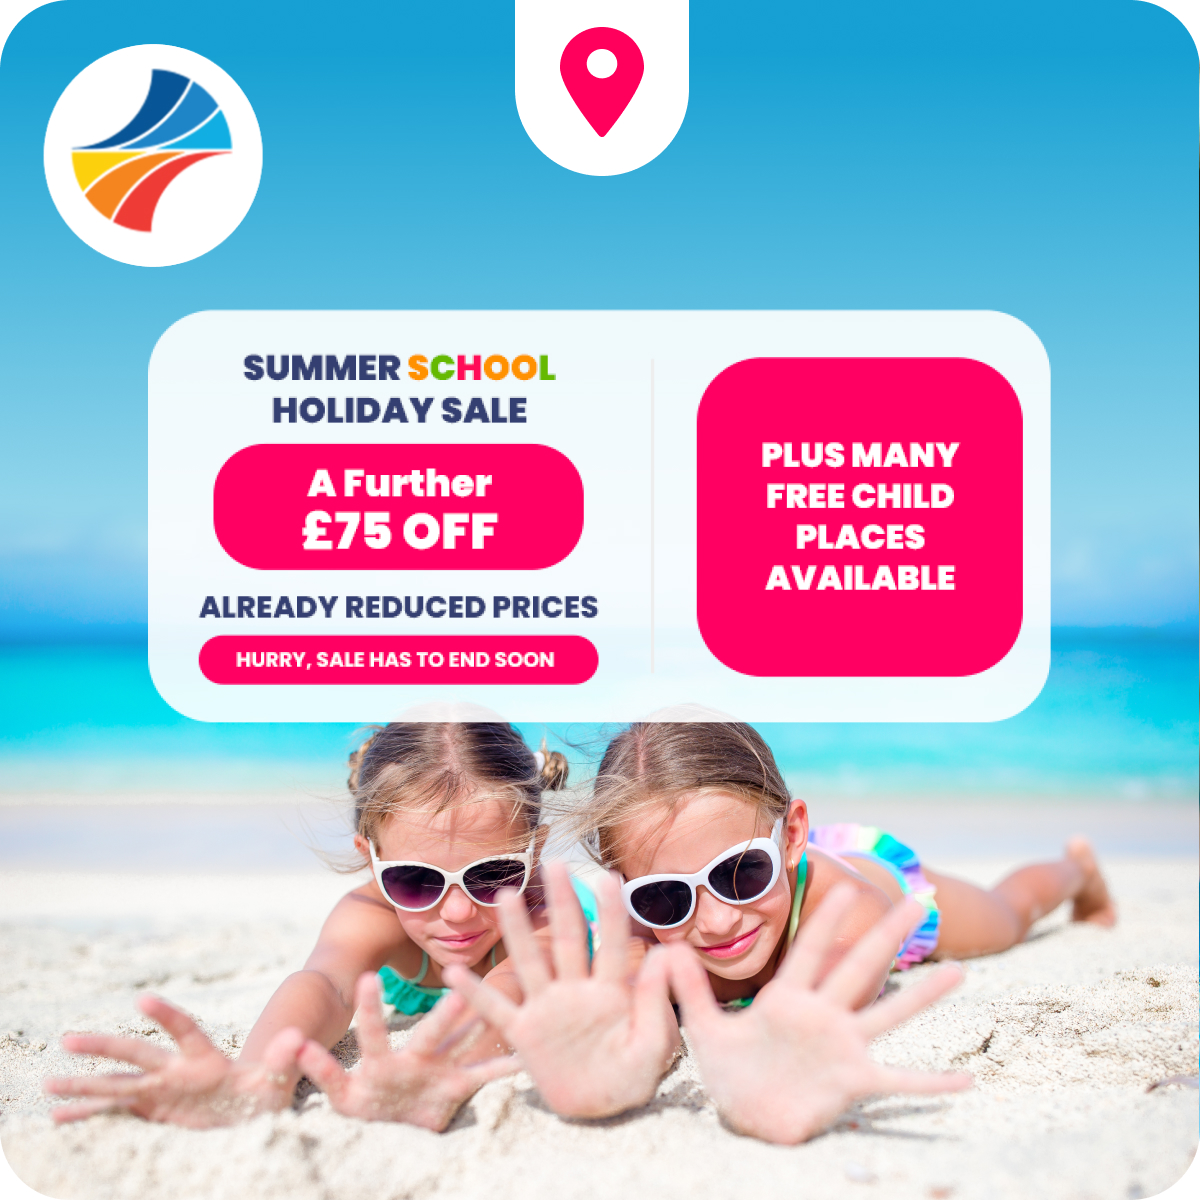 Bulgaria Summer SCHOOL Holidays Sale! A Further £75 OFF with @BalkanHolidays from @Humberside ☎️ 01652 682000 to book 📩sales@humbersideairporttravel.co.uk or 🚗 pop in and see us! Like Humberside Airport Travel on Facebook to keep track of our latest deals! Ts & Cs Apply